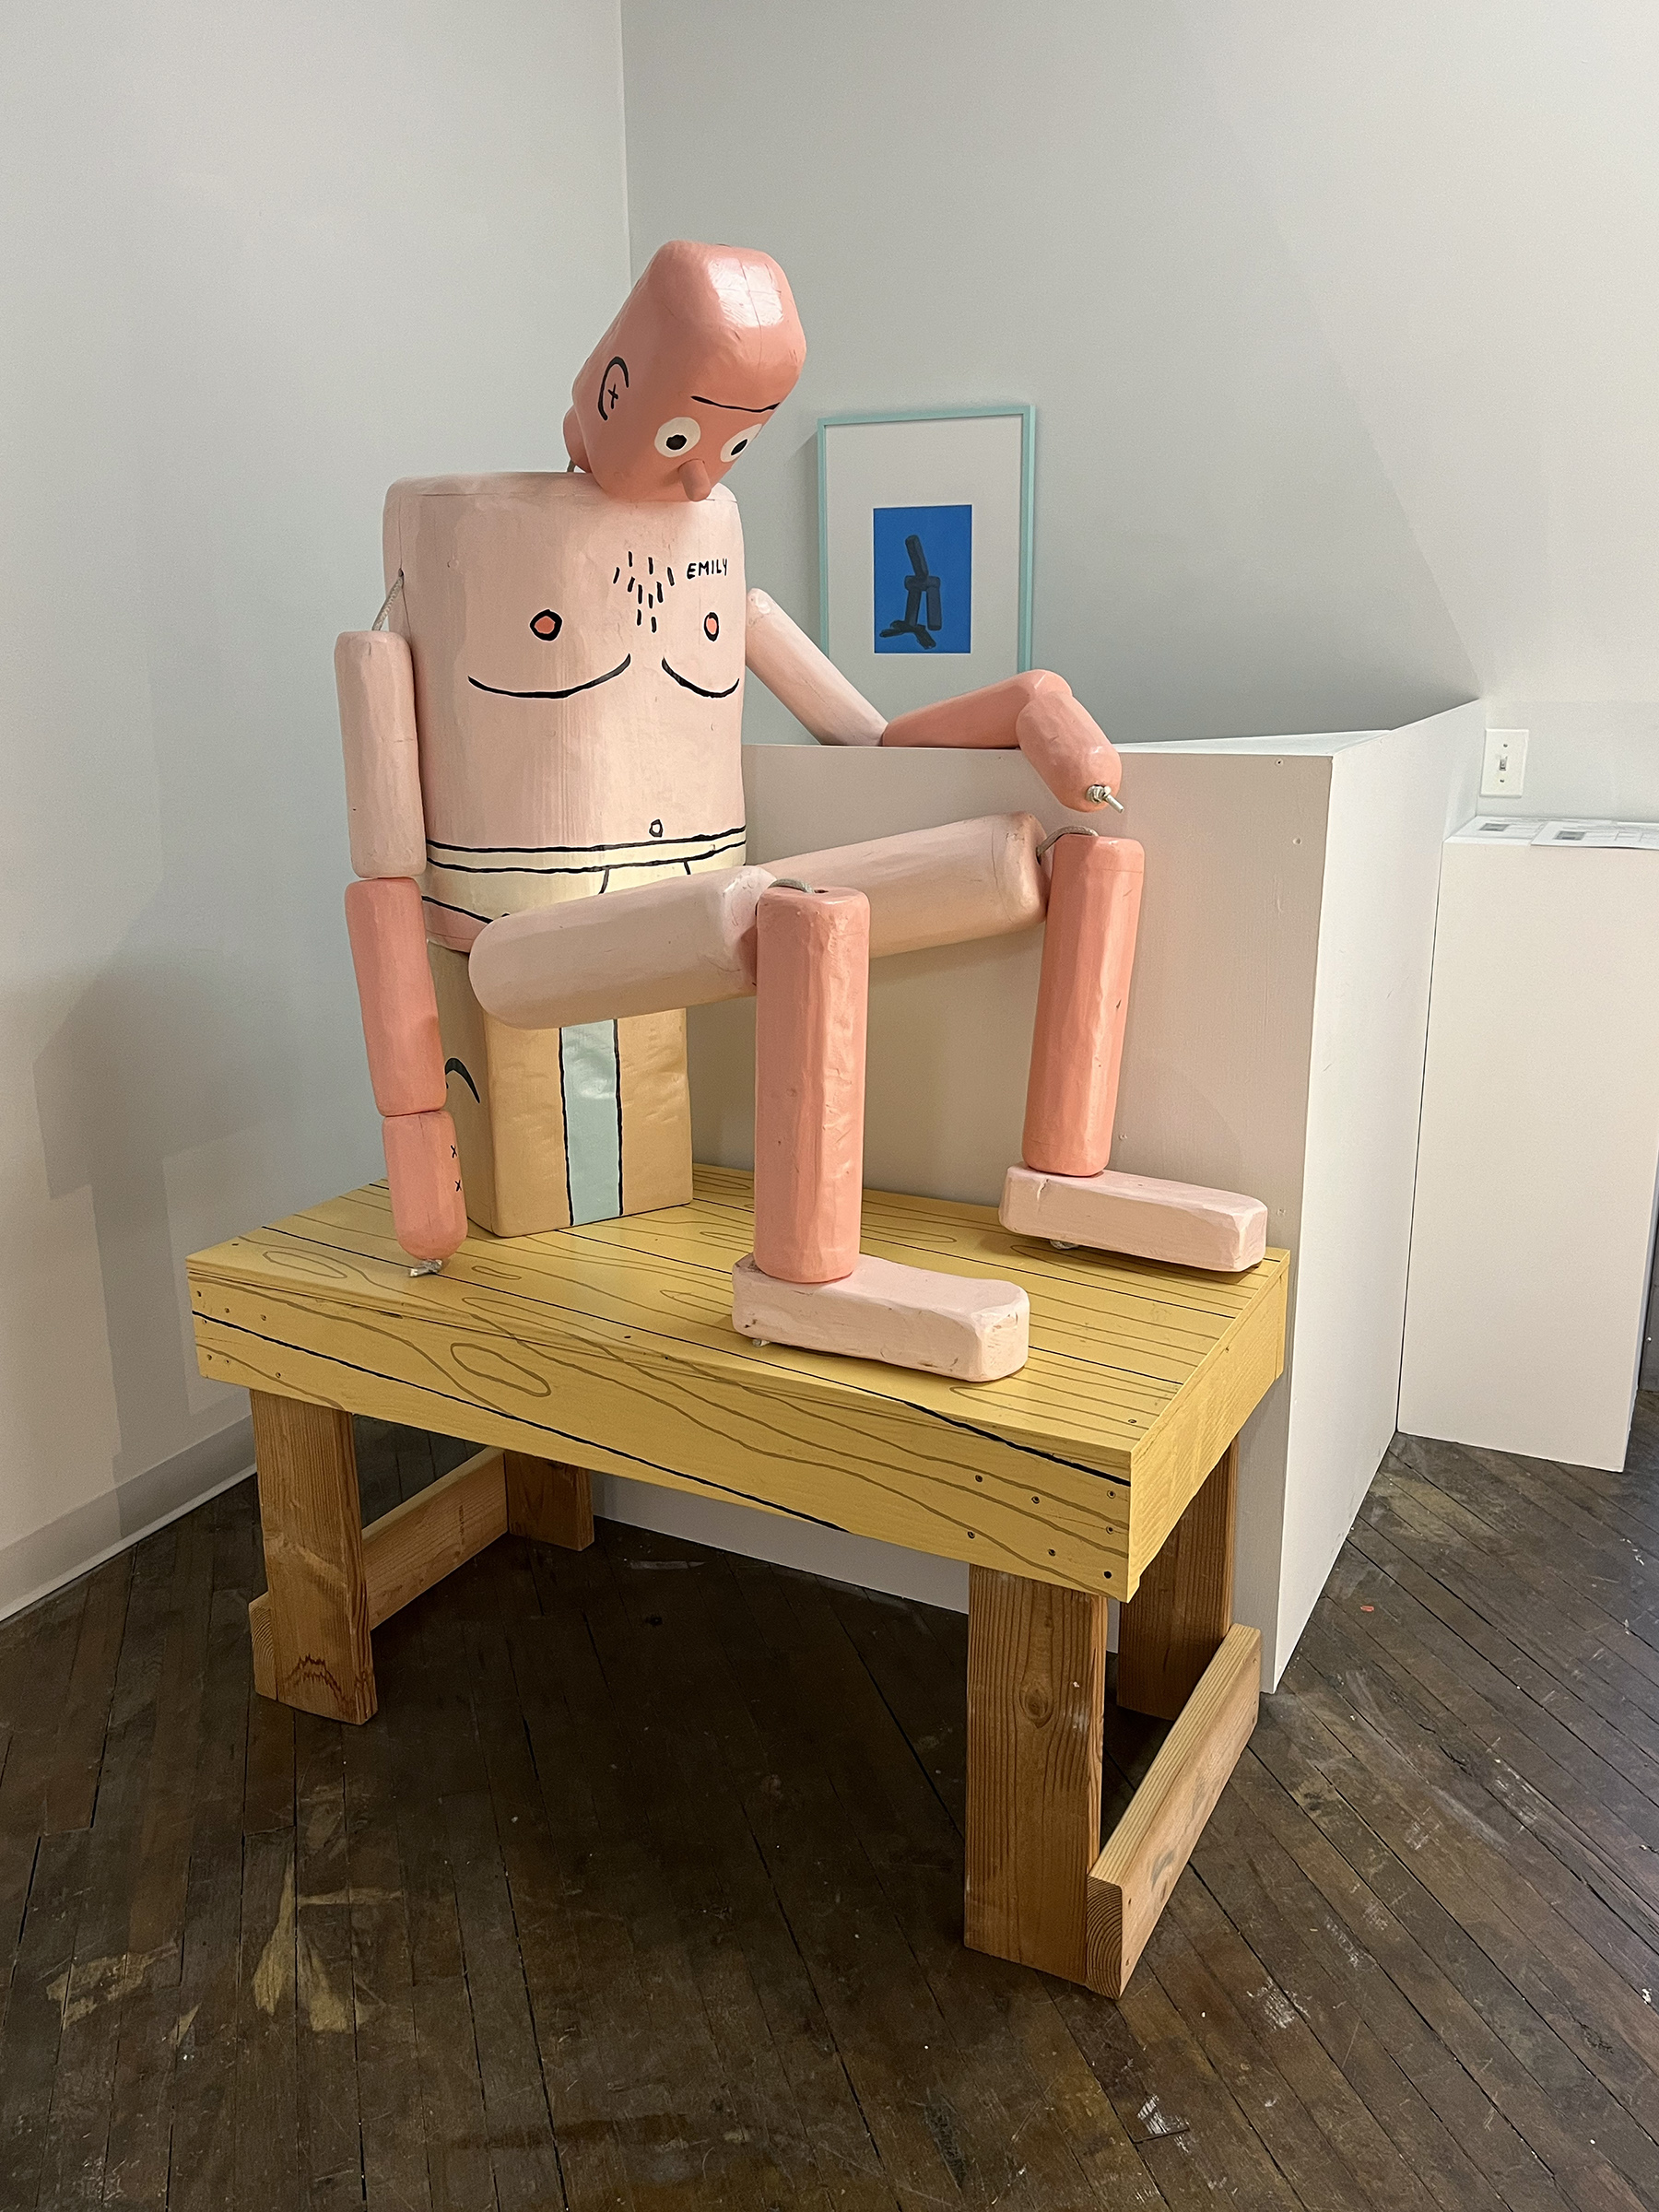 A photograph of a life-sized, figurative sculpture that resembles a push puppet toy. The wooden figure is painted to look like a man with pink skin wearing nothing but white underwear.